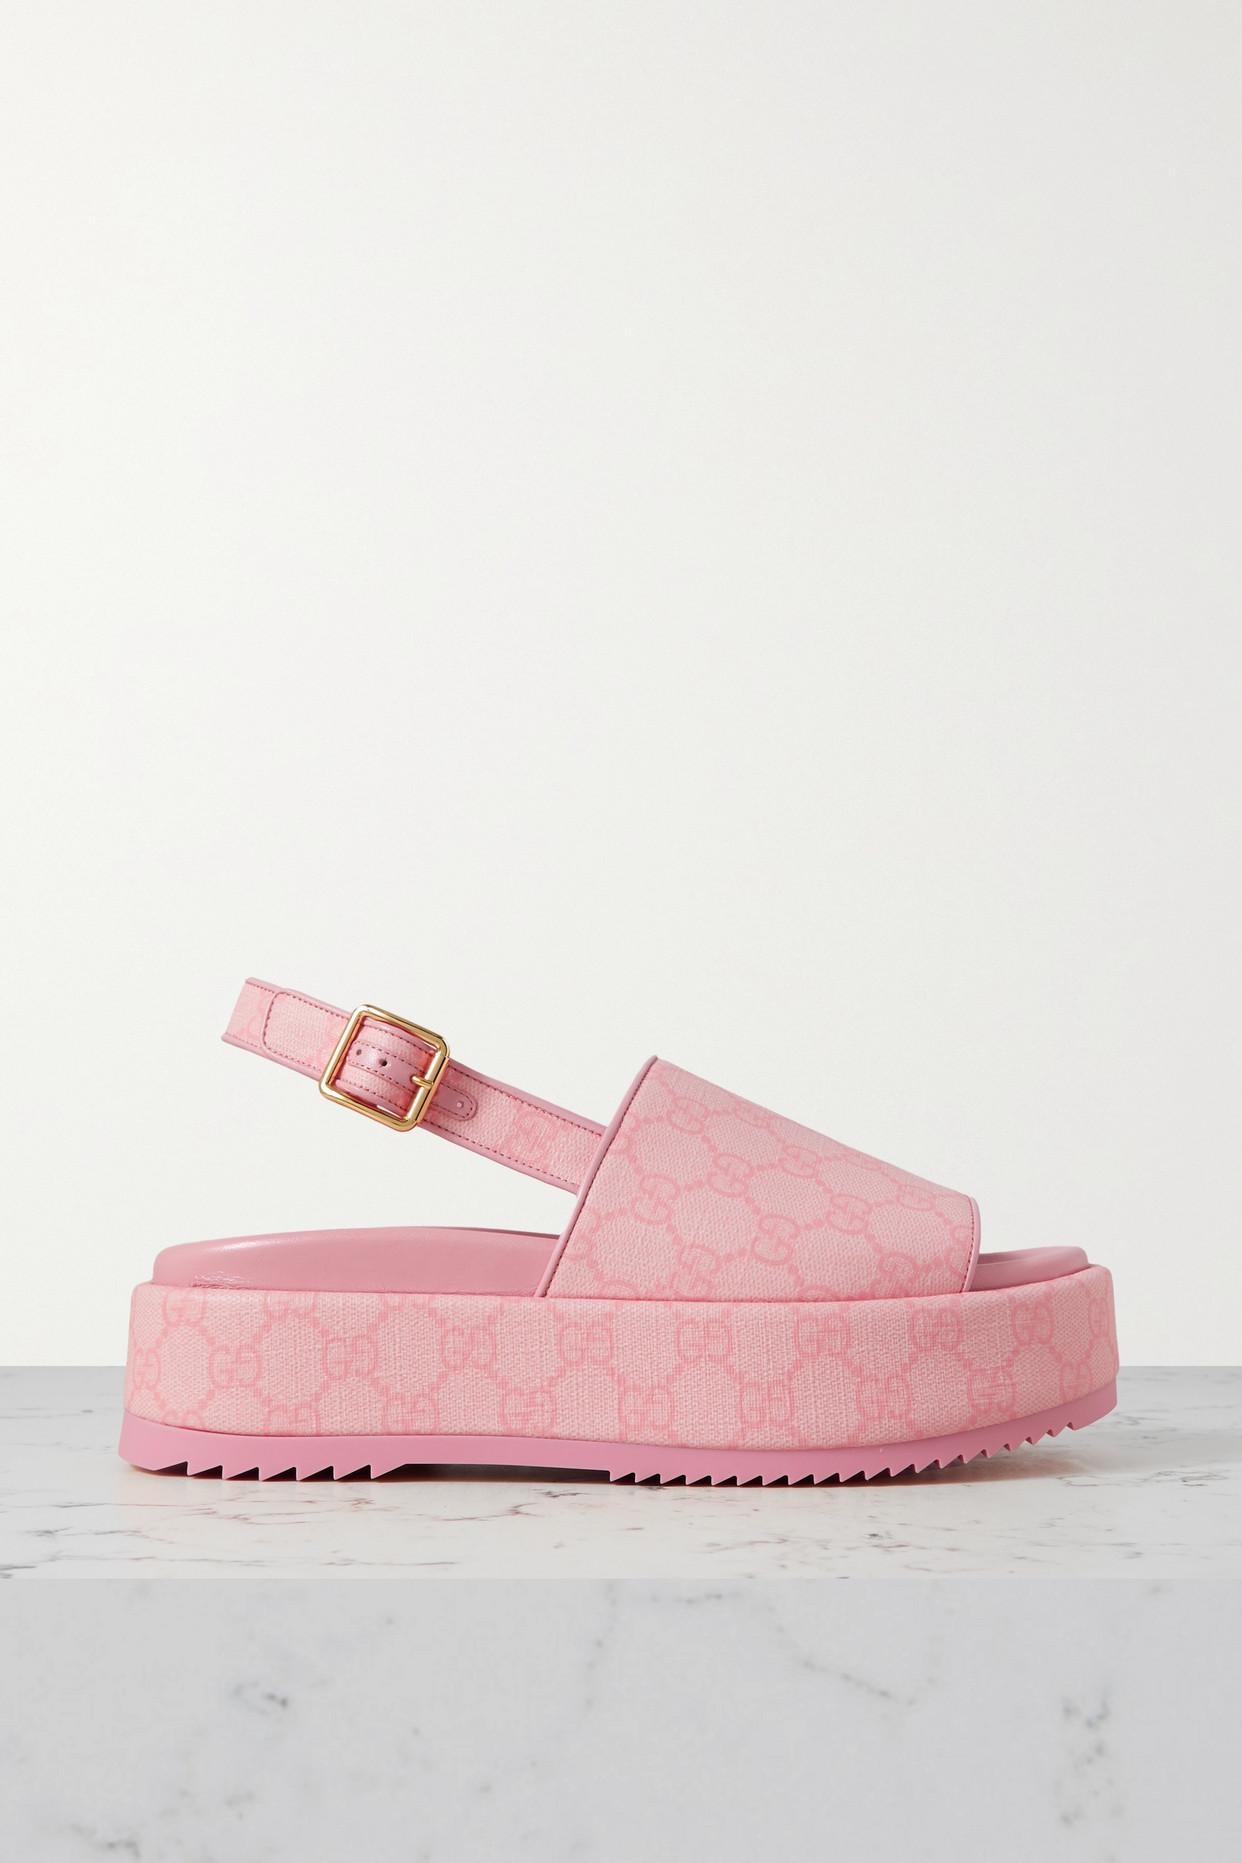 Gucci Angelina Coated-canvas Slingback Platform Sandals in Pink | Lyst